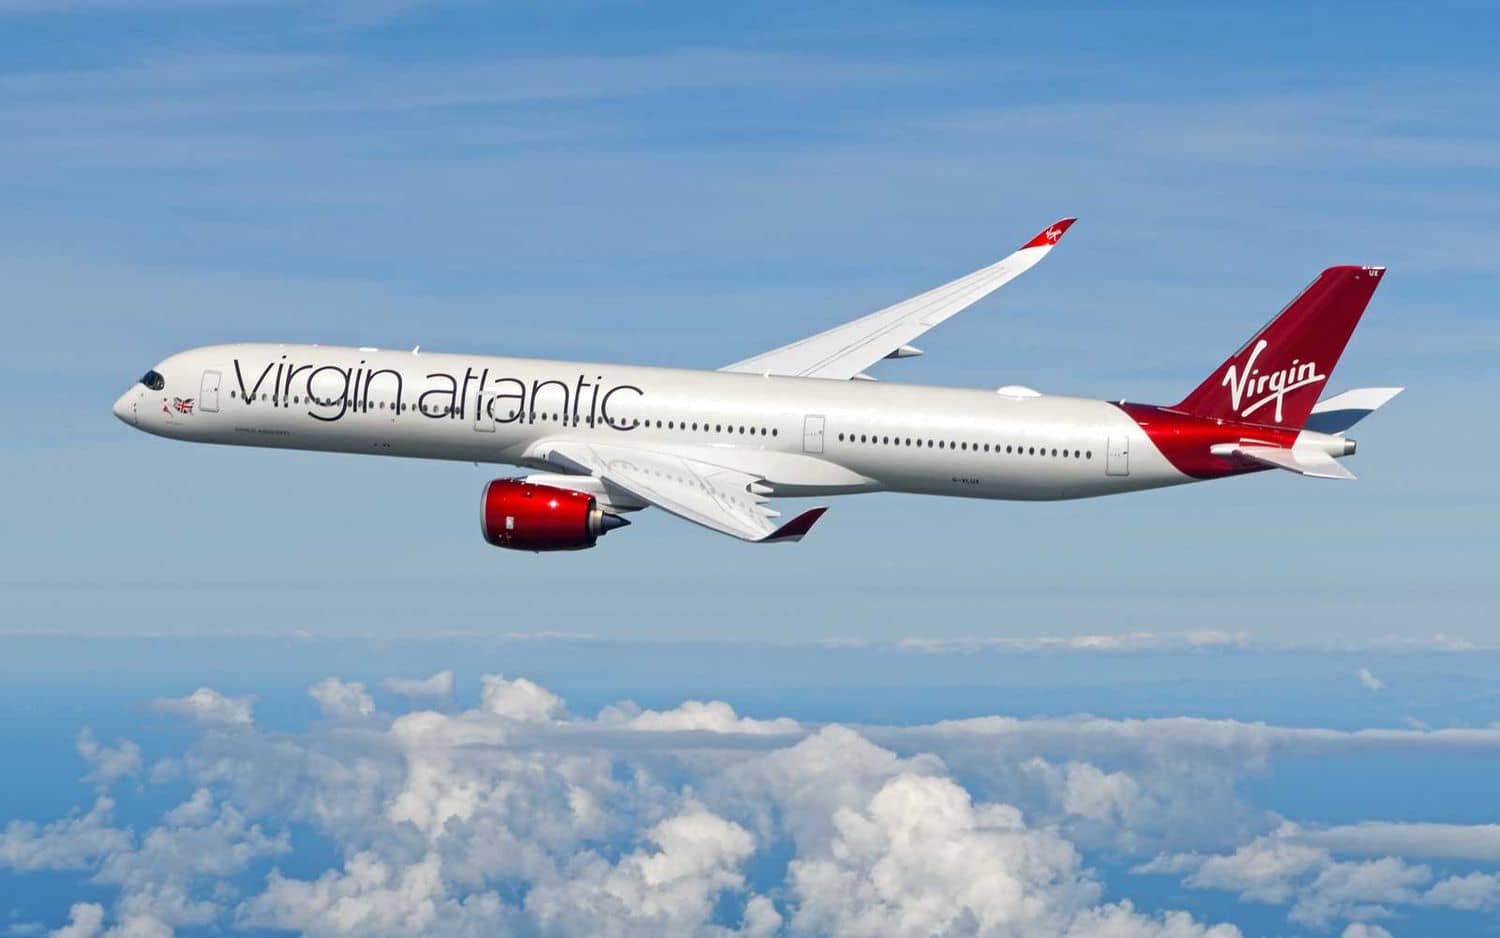 Virgin Atlantic Flight with ashes onboard